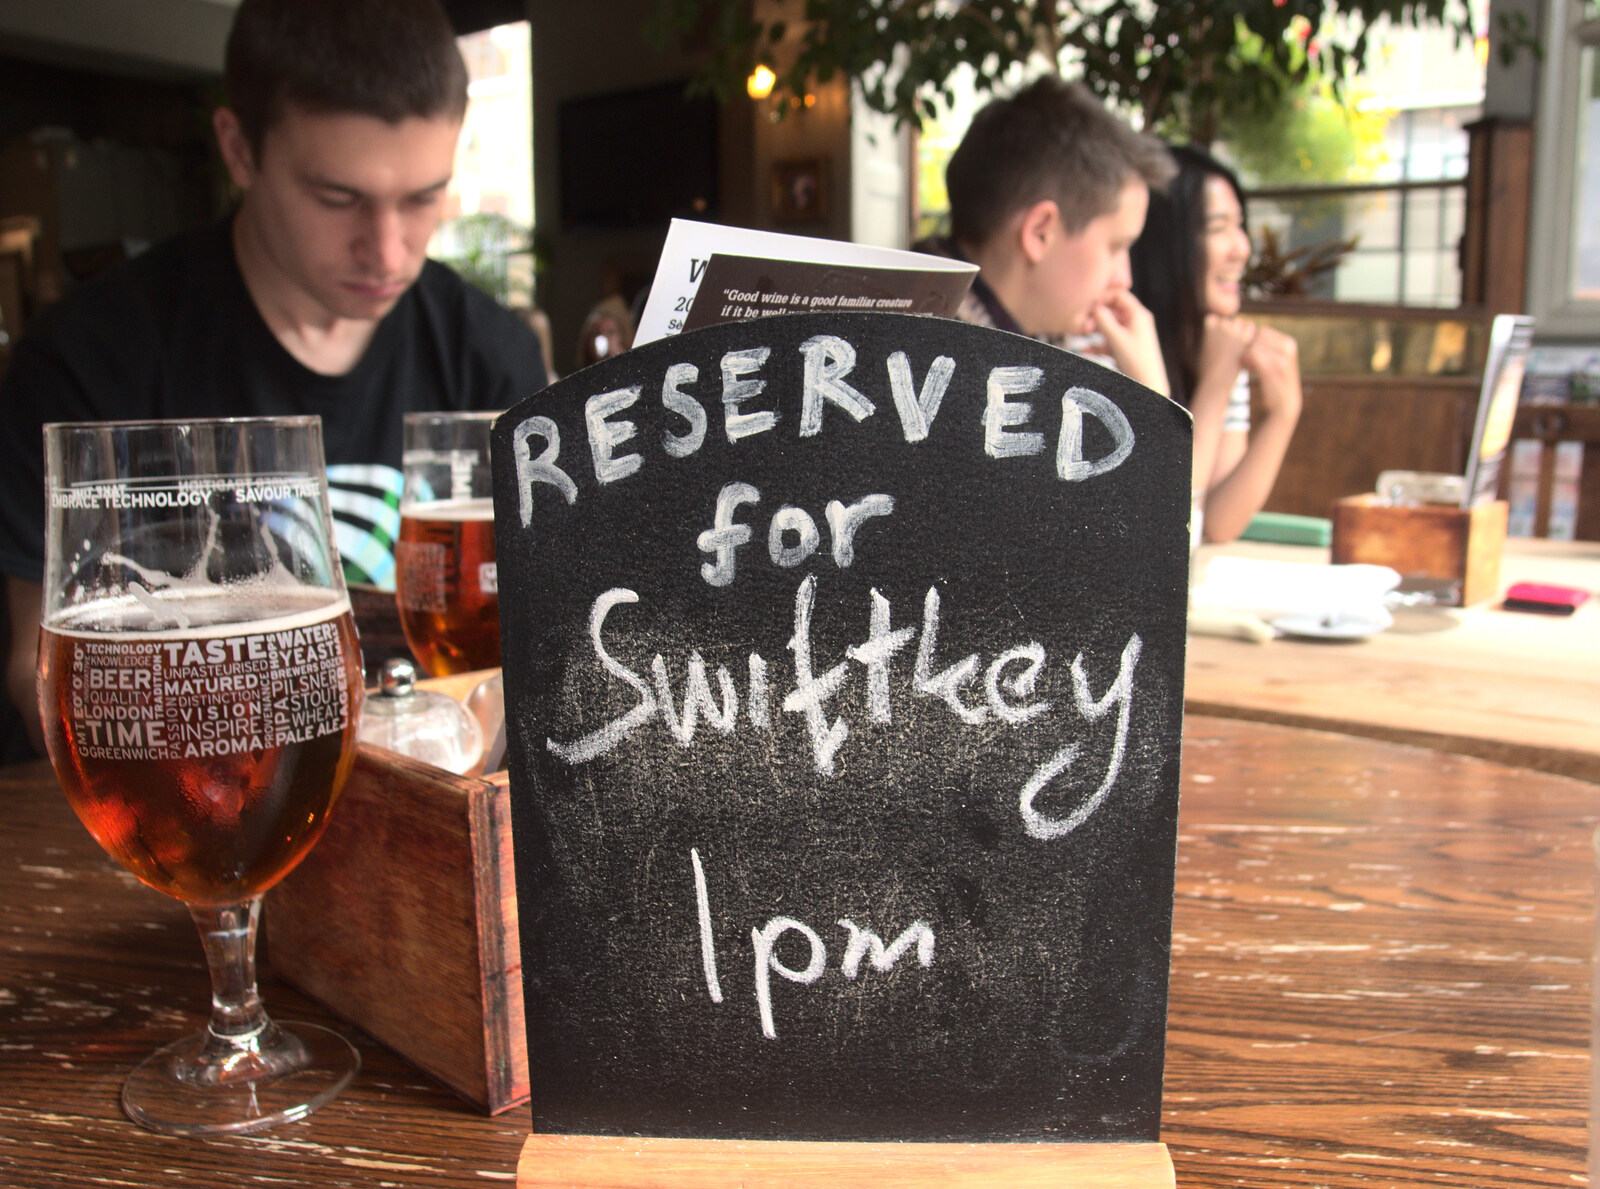 The signs says it: reserved for SwiftKey from SwiftKey Innovation Day, and Pizza Pub, Westminster and Southwark - 14th August 2014